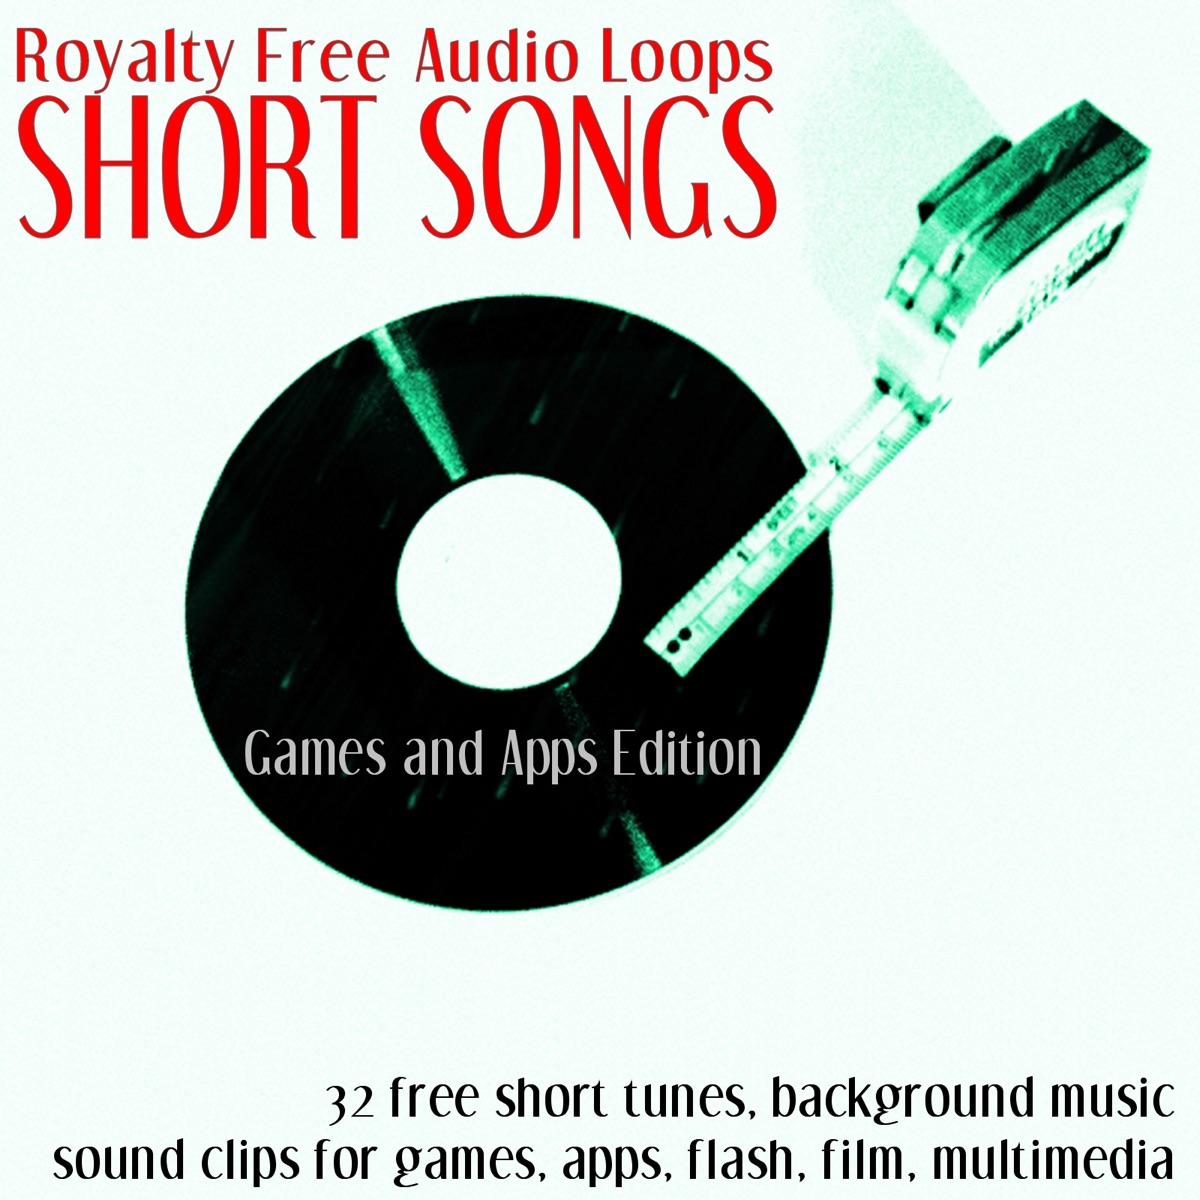 Royalty Free music for games - ROYALTY FREE MUSIC